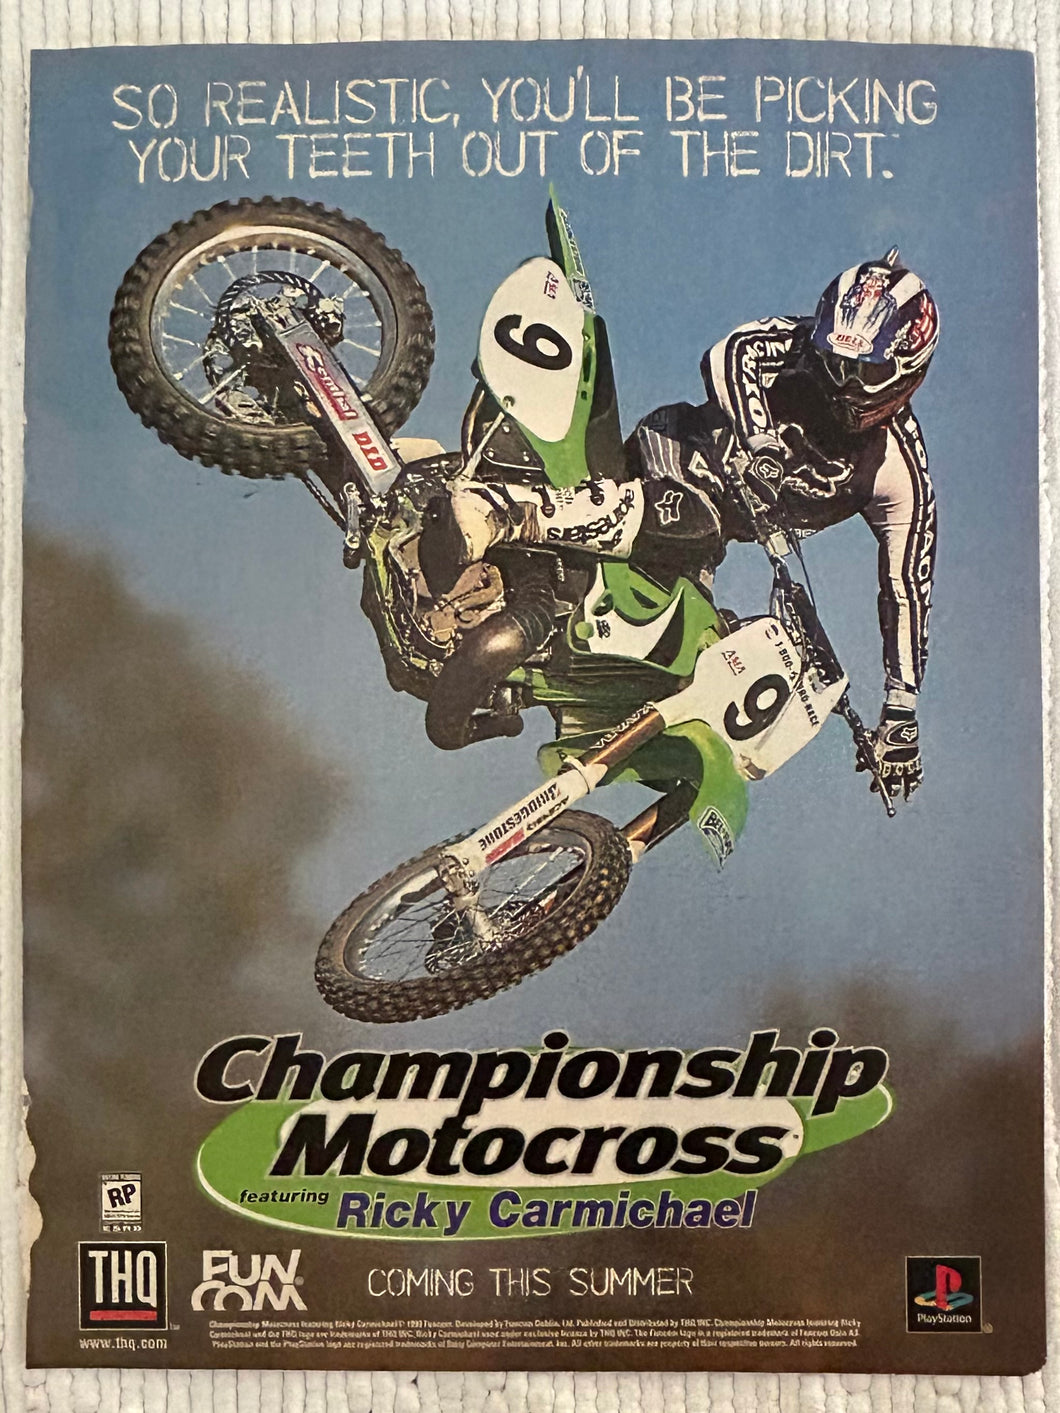 Championship Motocross Featuring Ricky Carmichael - PlayStation - Original Vintage Advertisement - Print Ads - Laminated A4 Poster